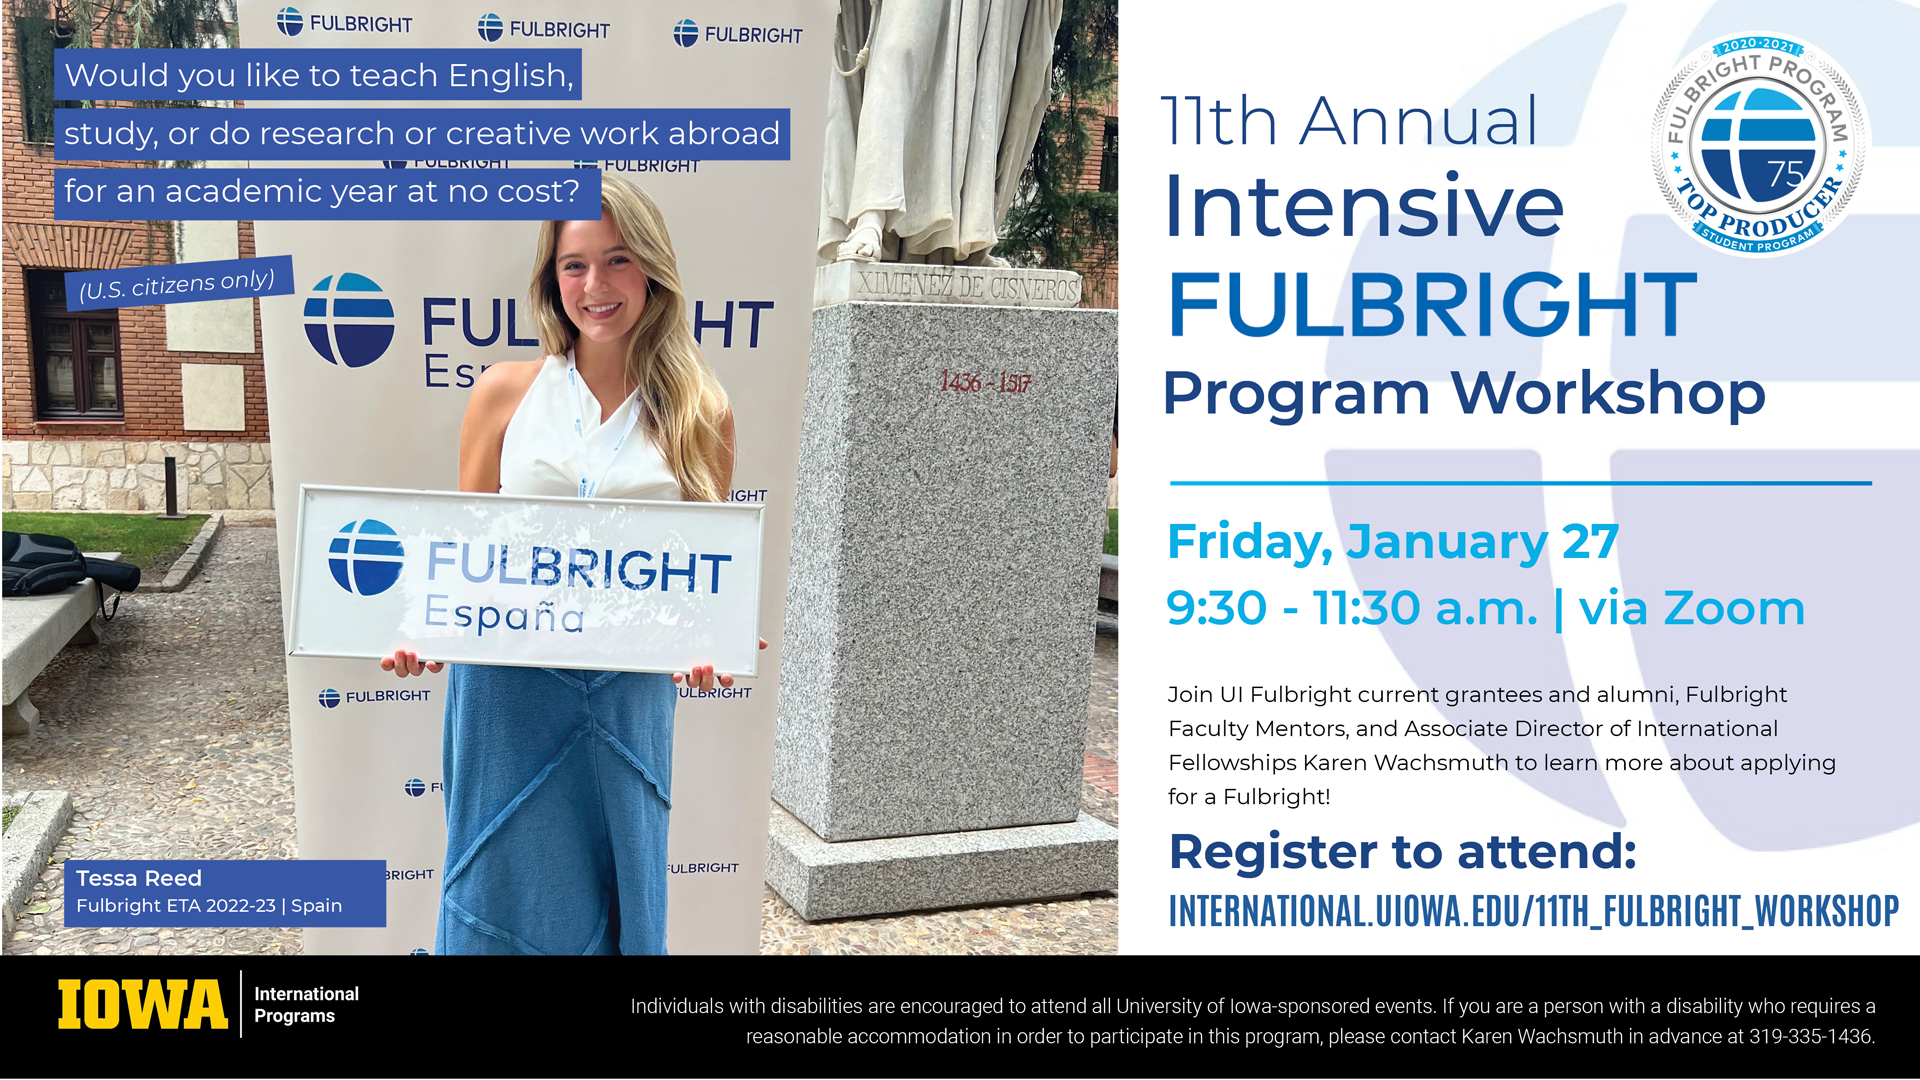 Fullbright workshop, to learn more about Fullbright!